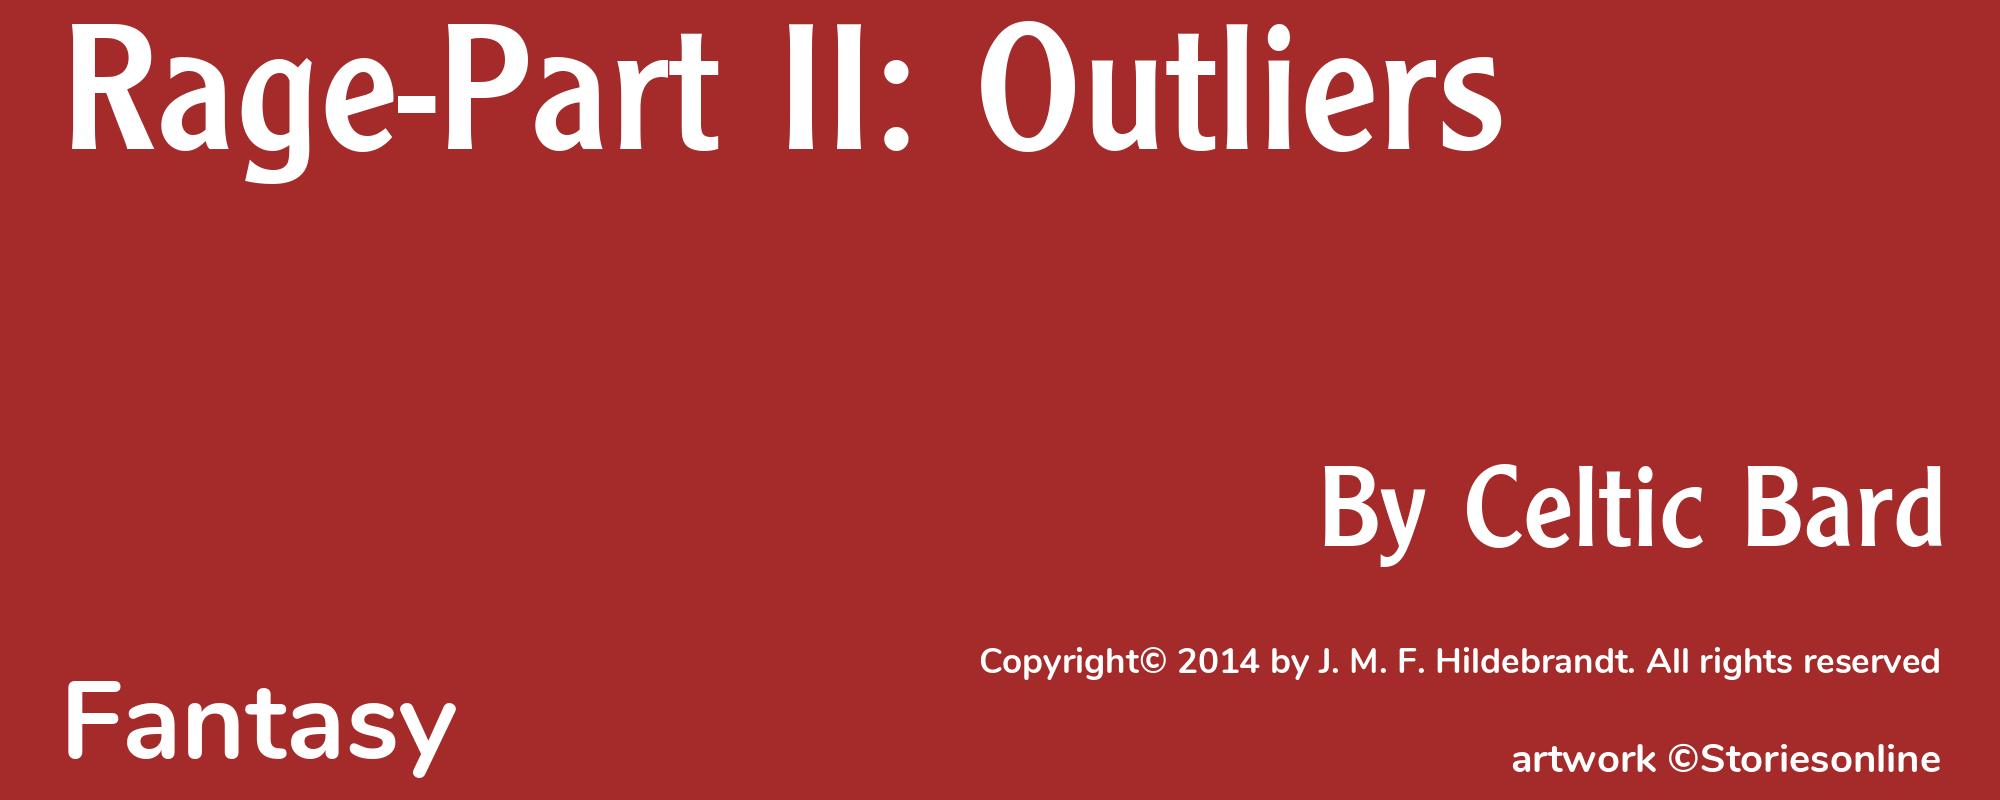 Rage-Part II: Outliers - Cover